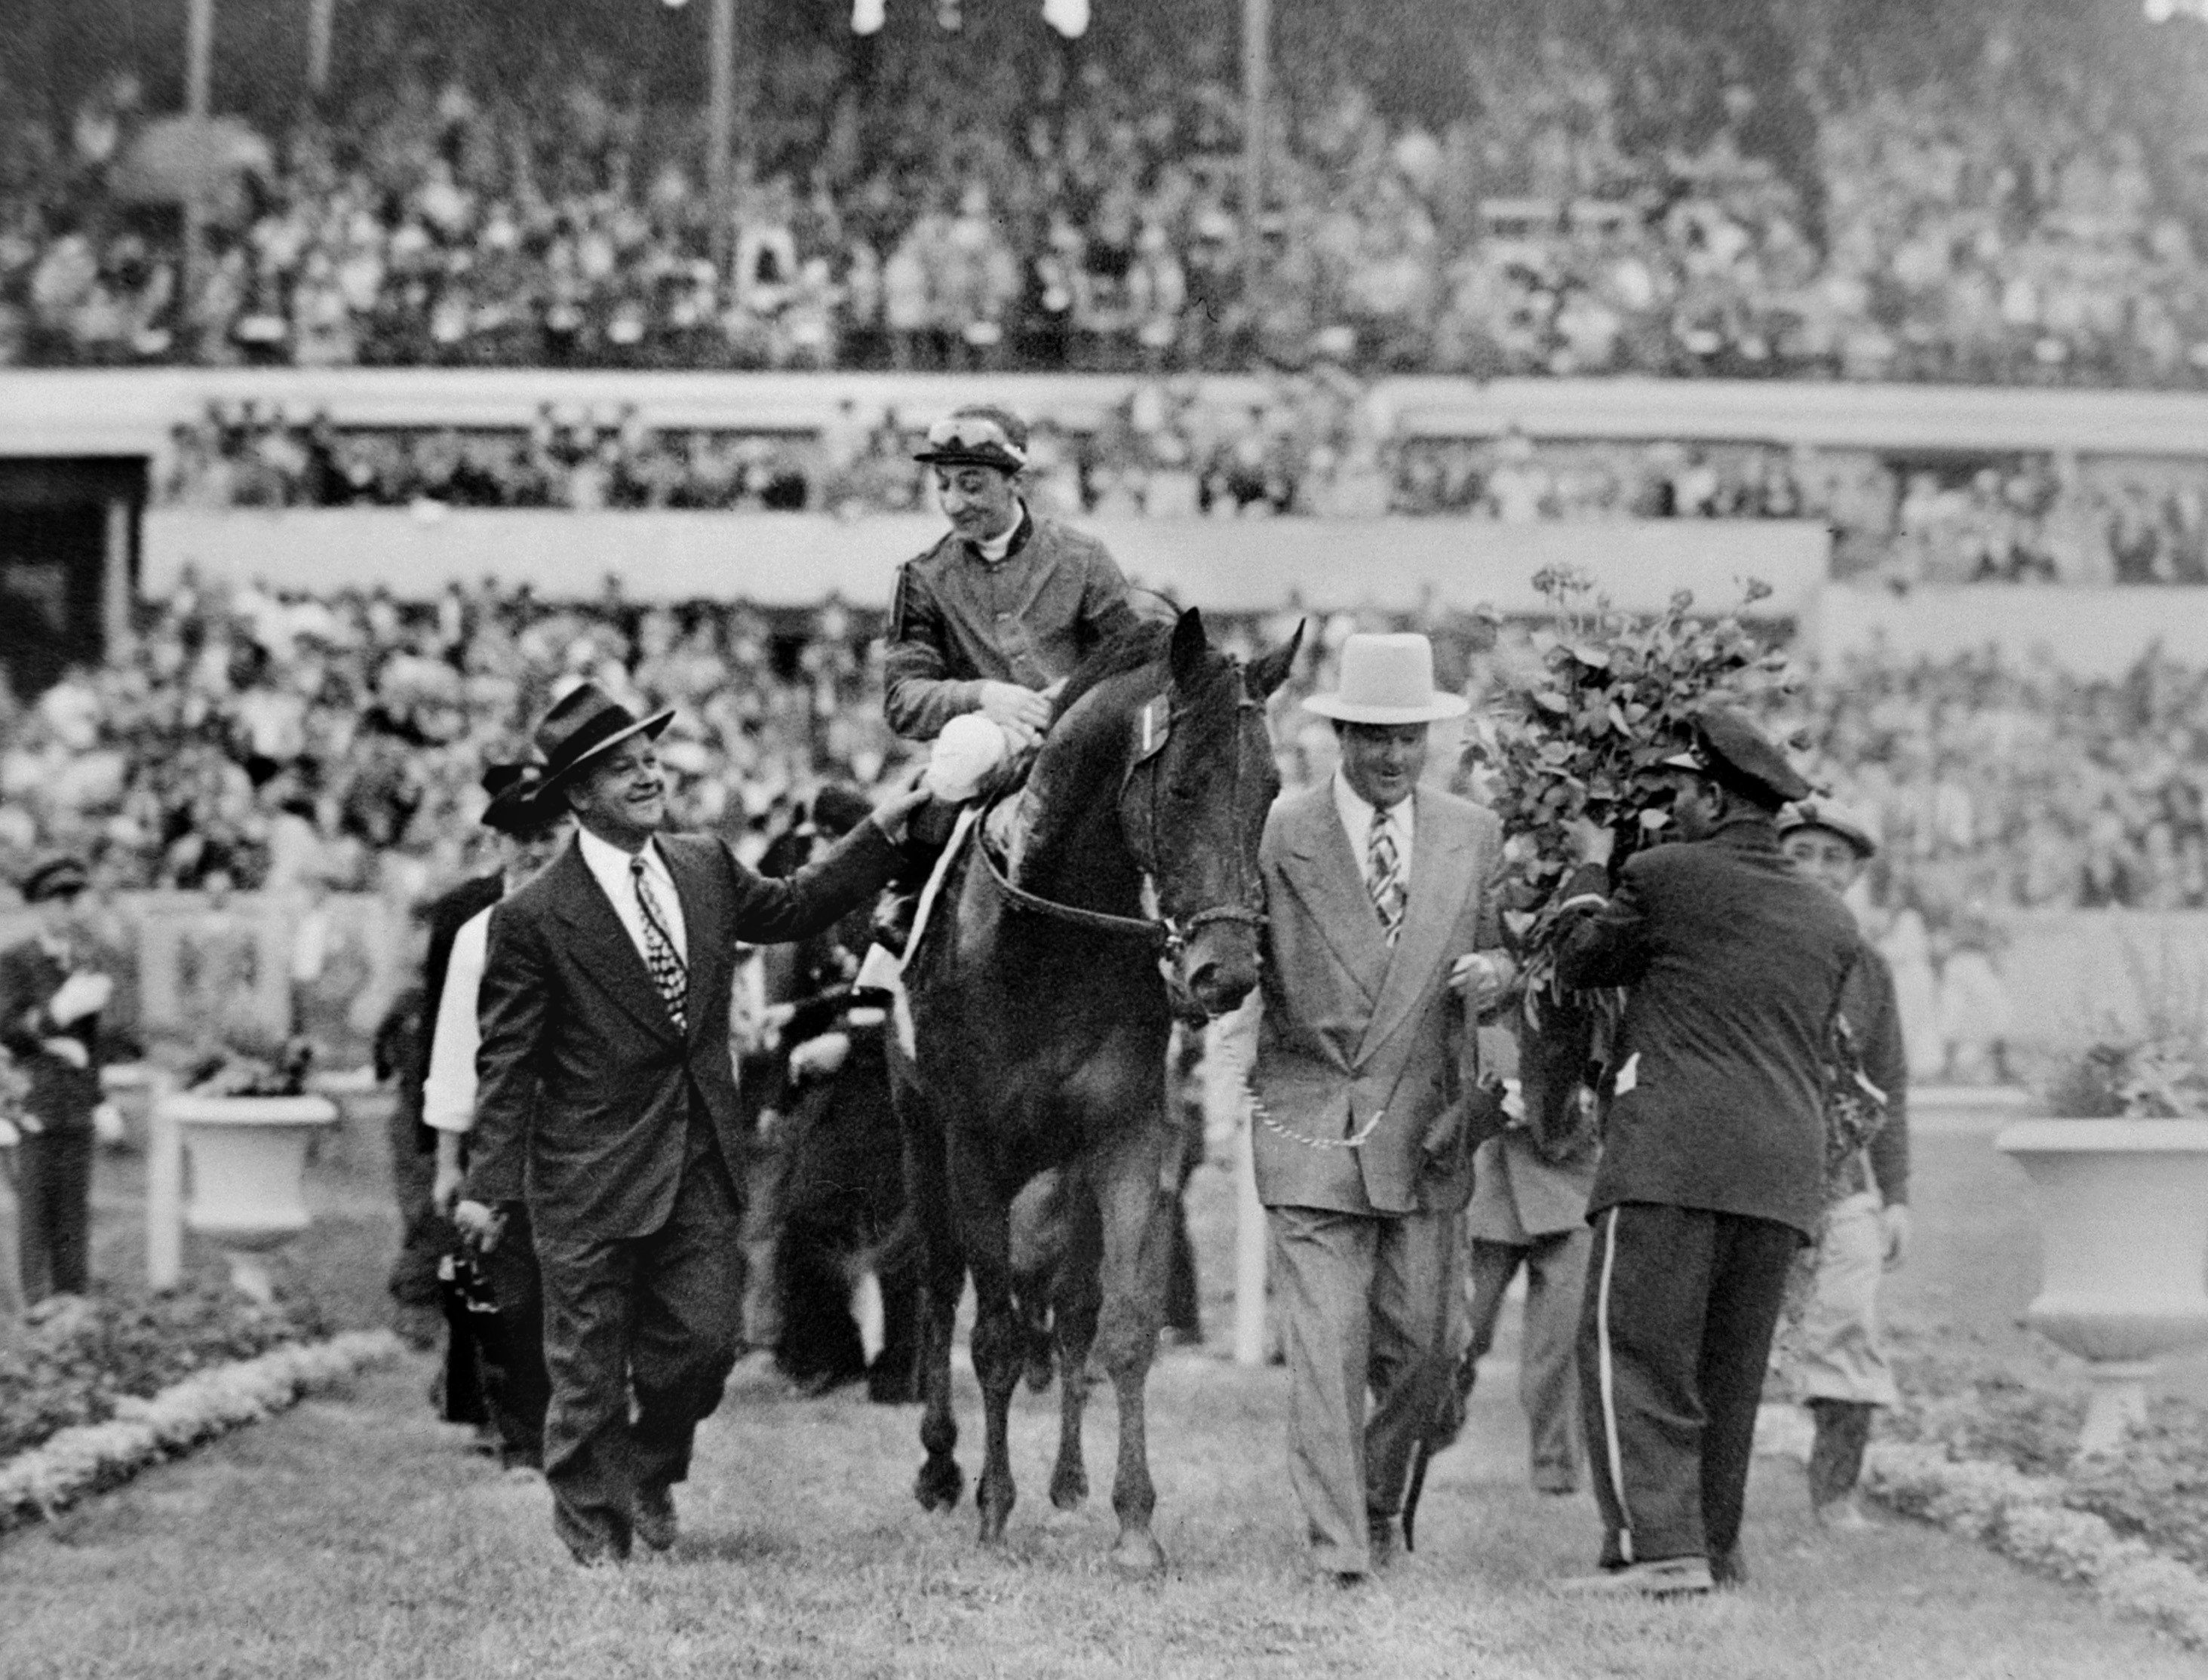 Arcaro on Citation after 1948 KY Derby win, with Ben Jones & H.A. Jimmy Jones